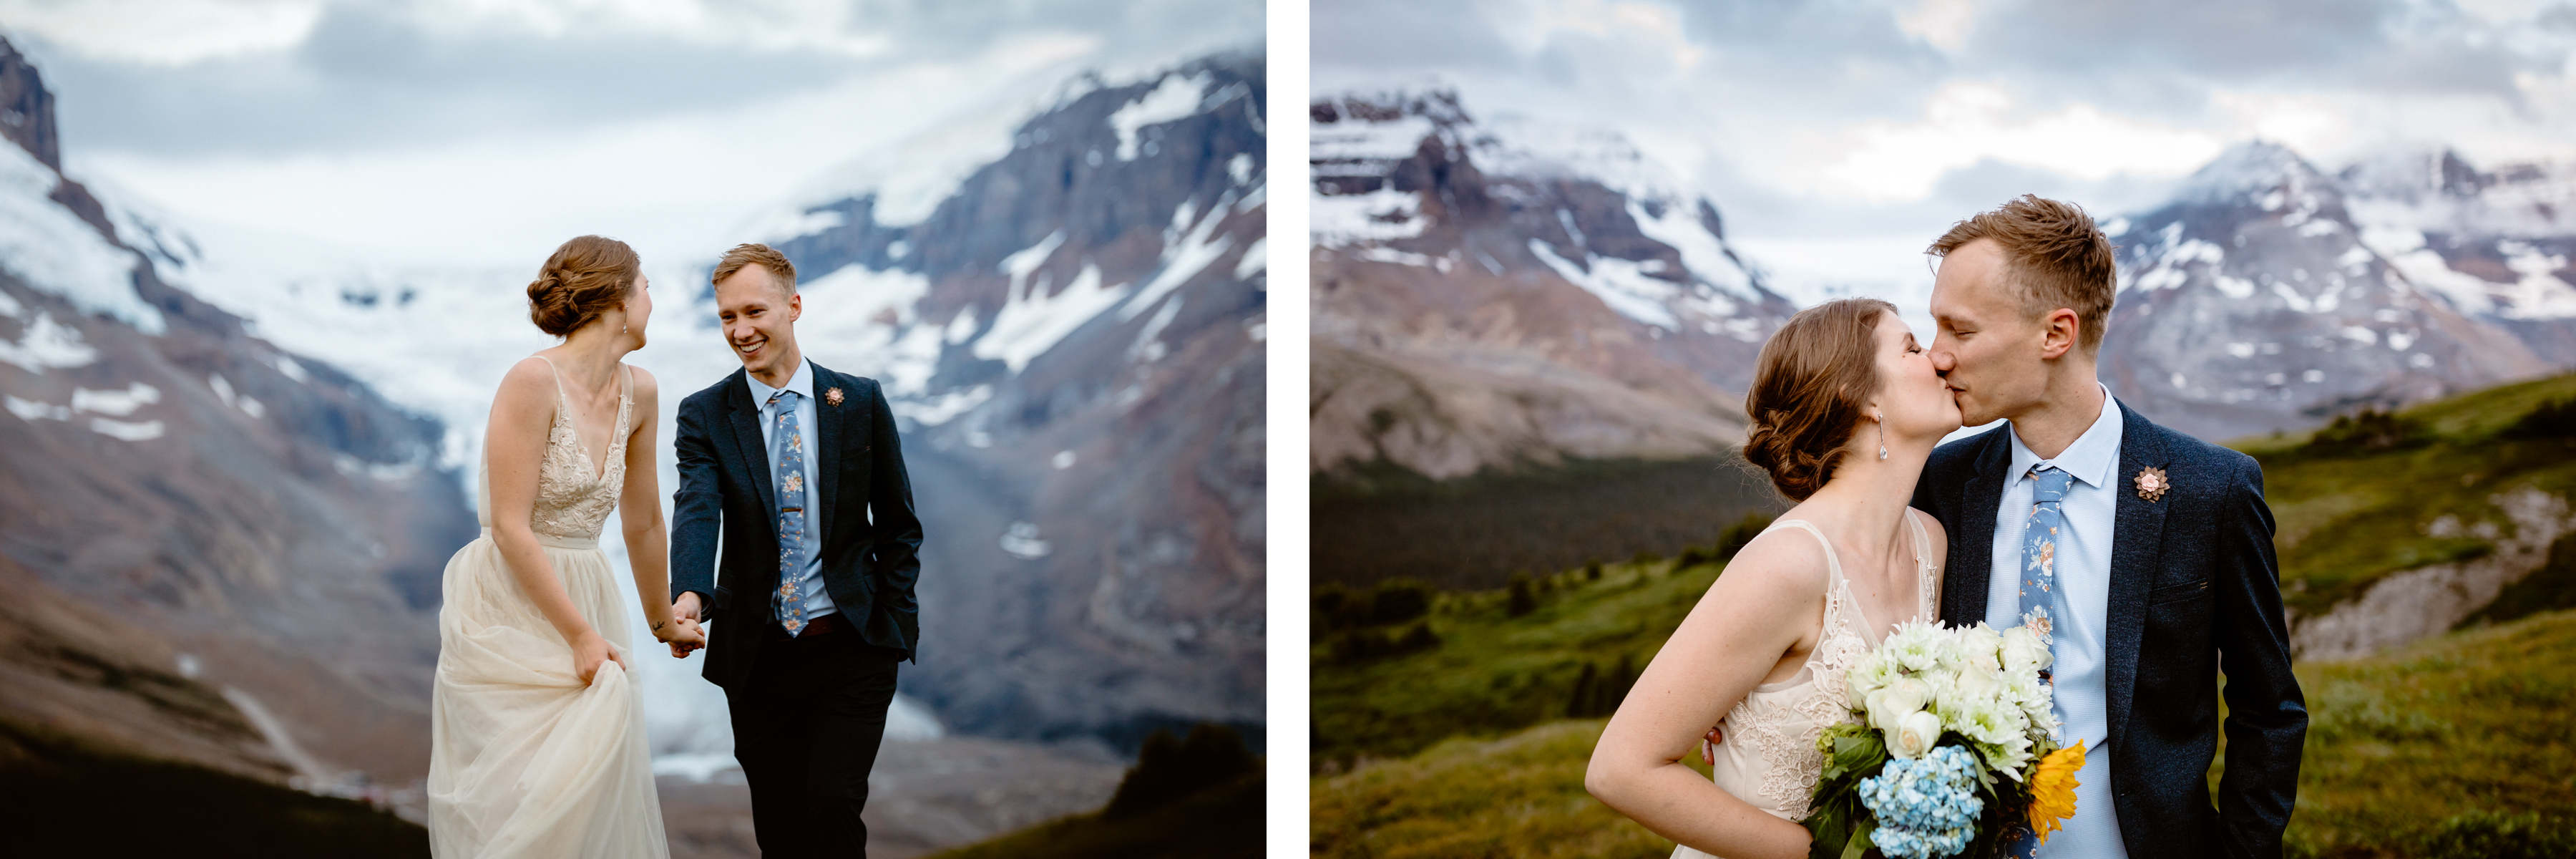 Hiking Elopement Photographers in Banff National Park - Photo 18